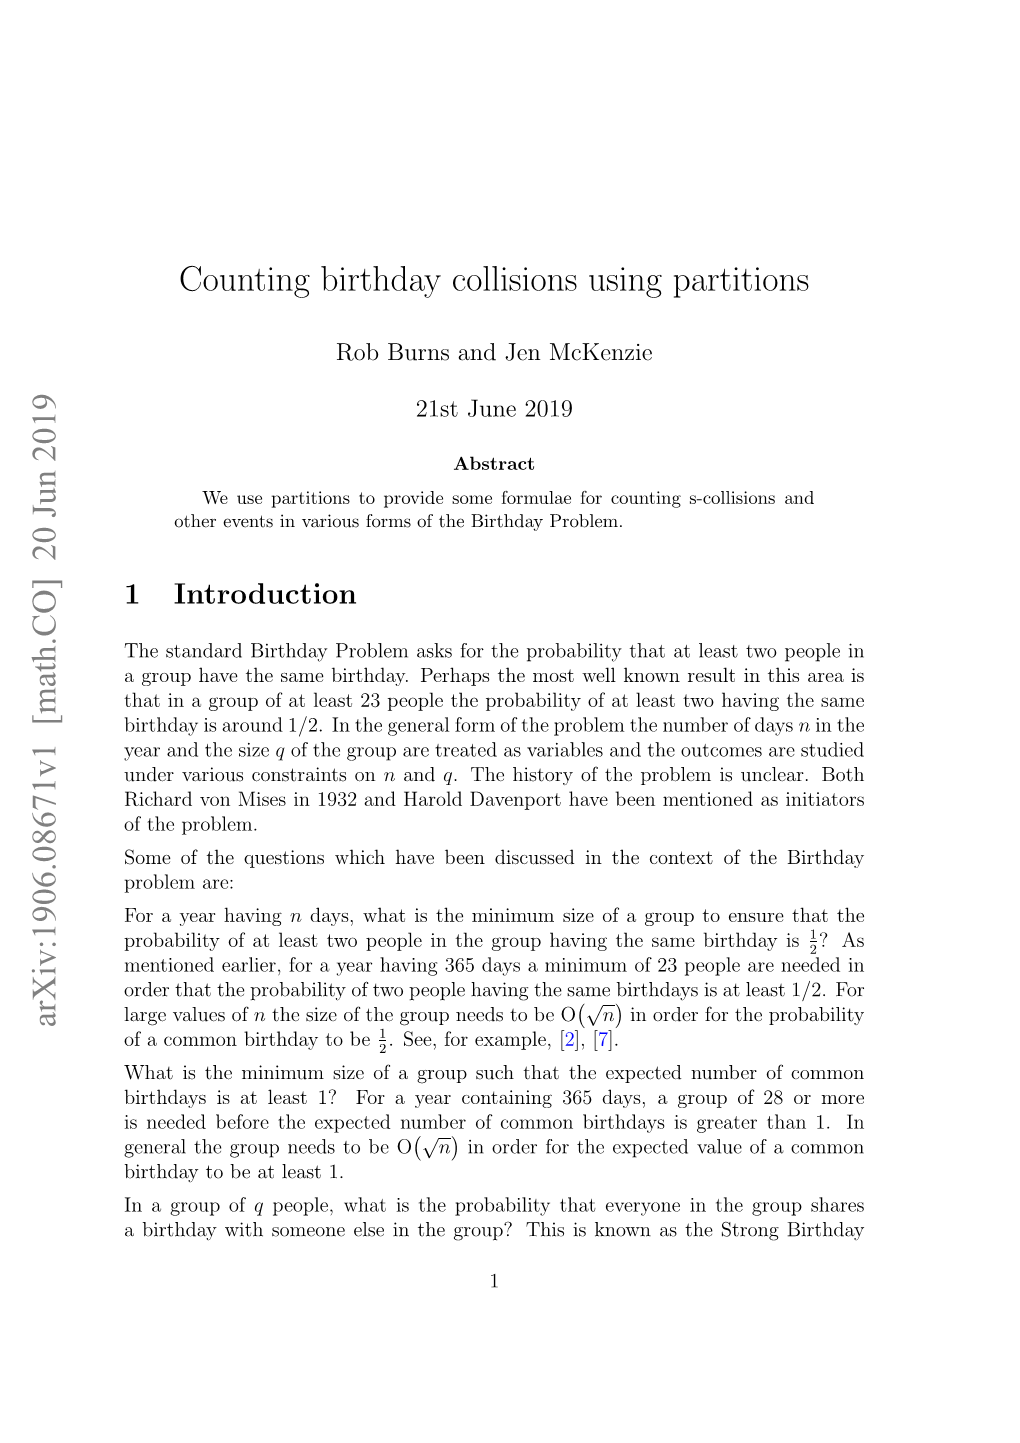 Counting Birthday Collisions Using Partitions